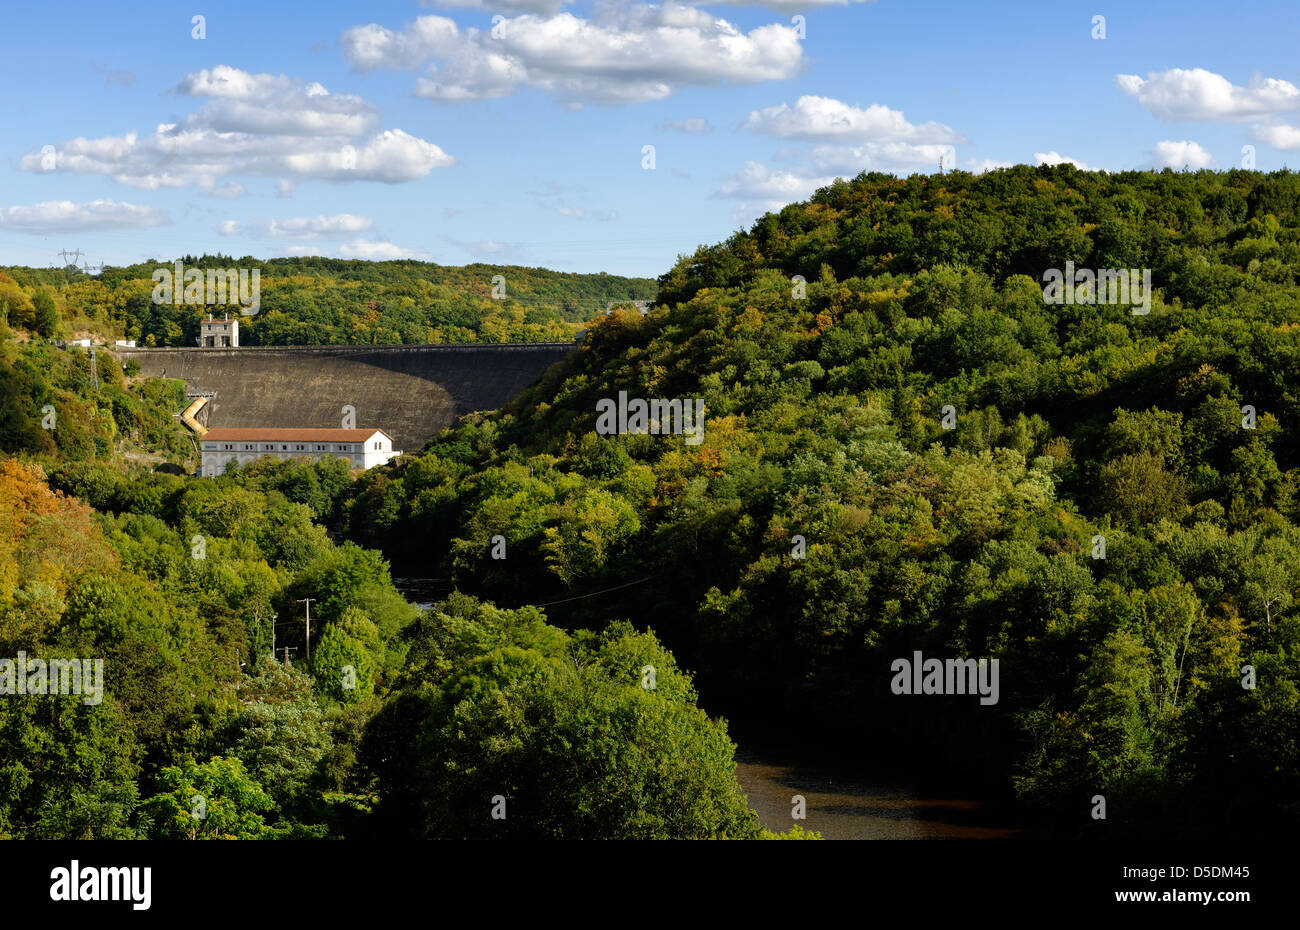 Looking towards the Eguzon hydroelectric dam on the river Creuse, central France Stock Photo